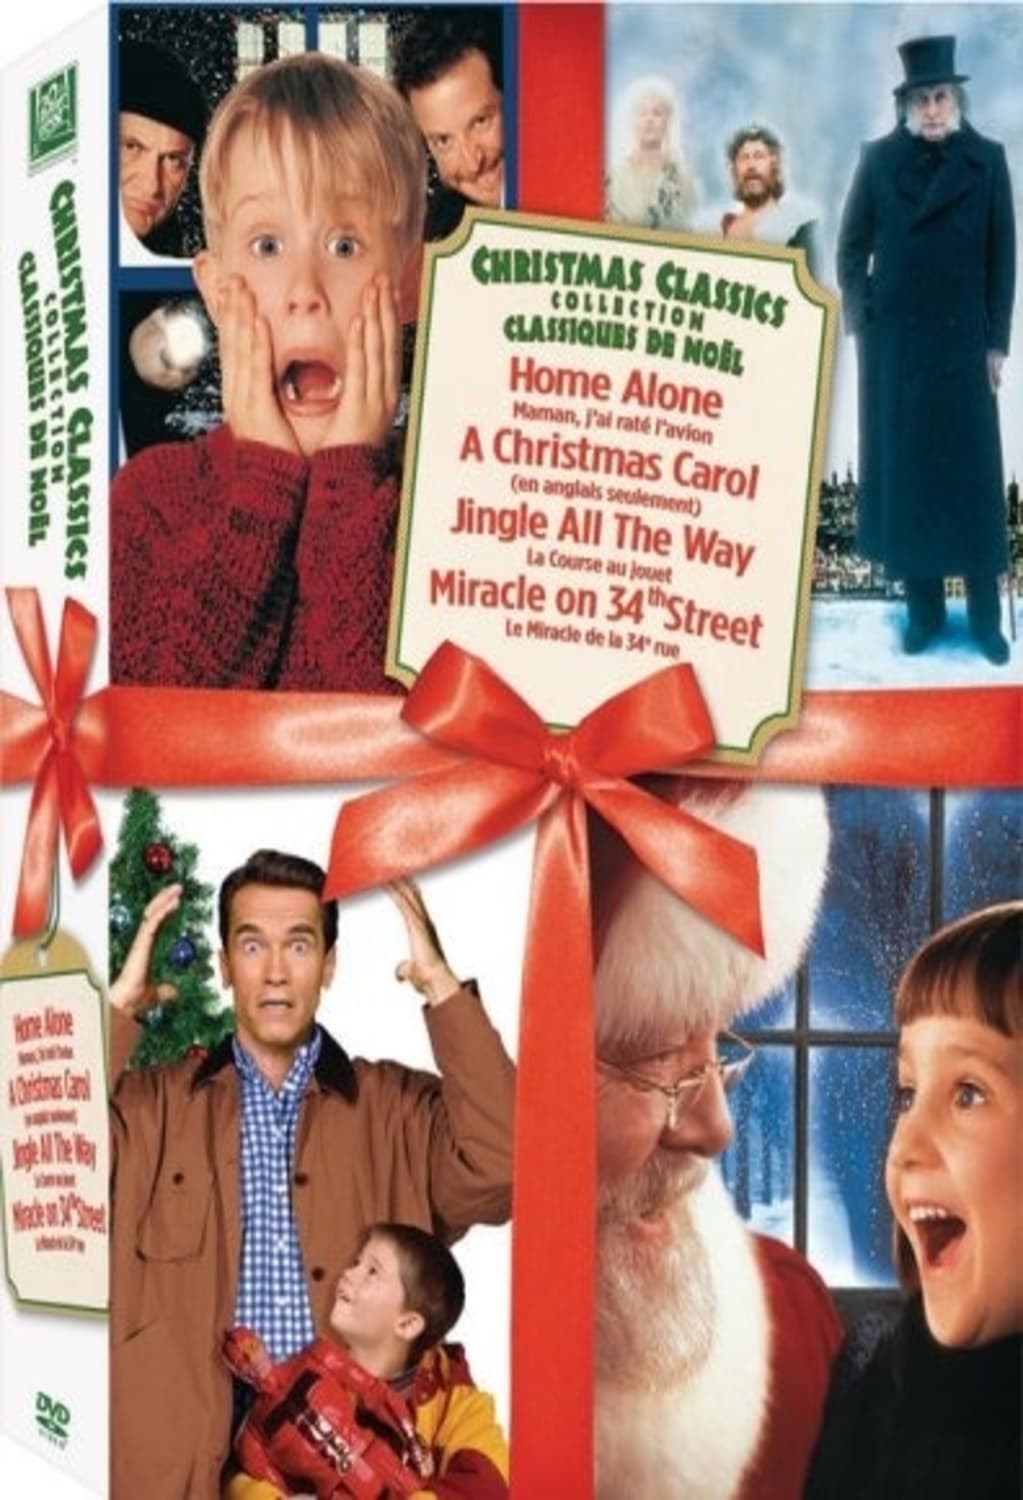 Christmas Classics Collection (Home Alone/A Christmas Carol/Jingle All The Way/Miracle on 34th Street) (DVD)